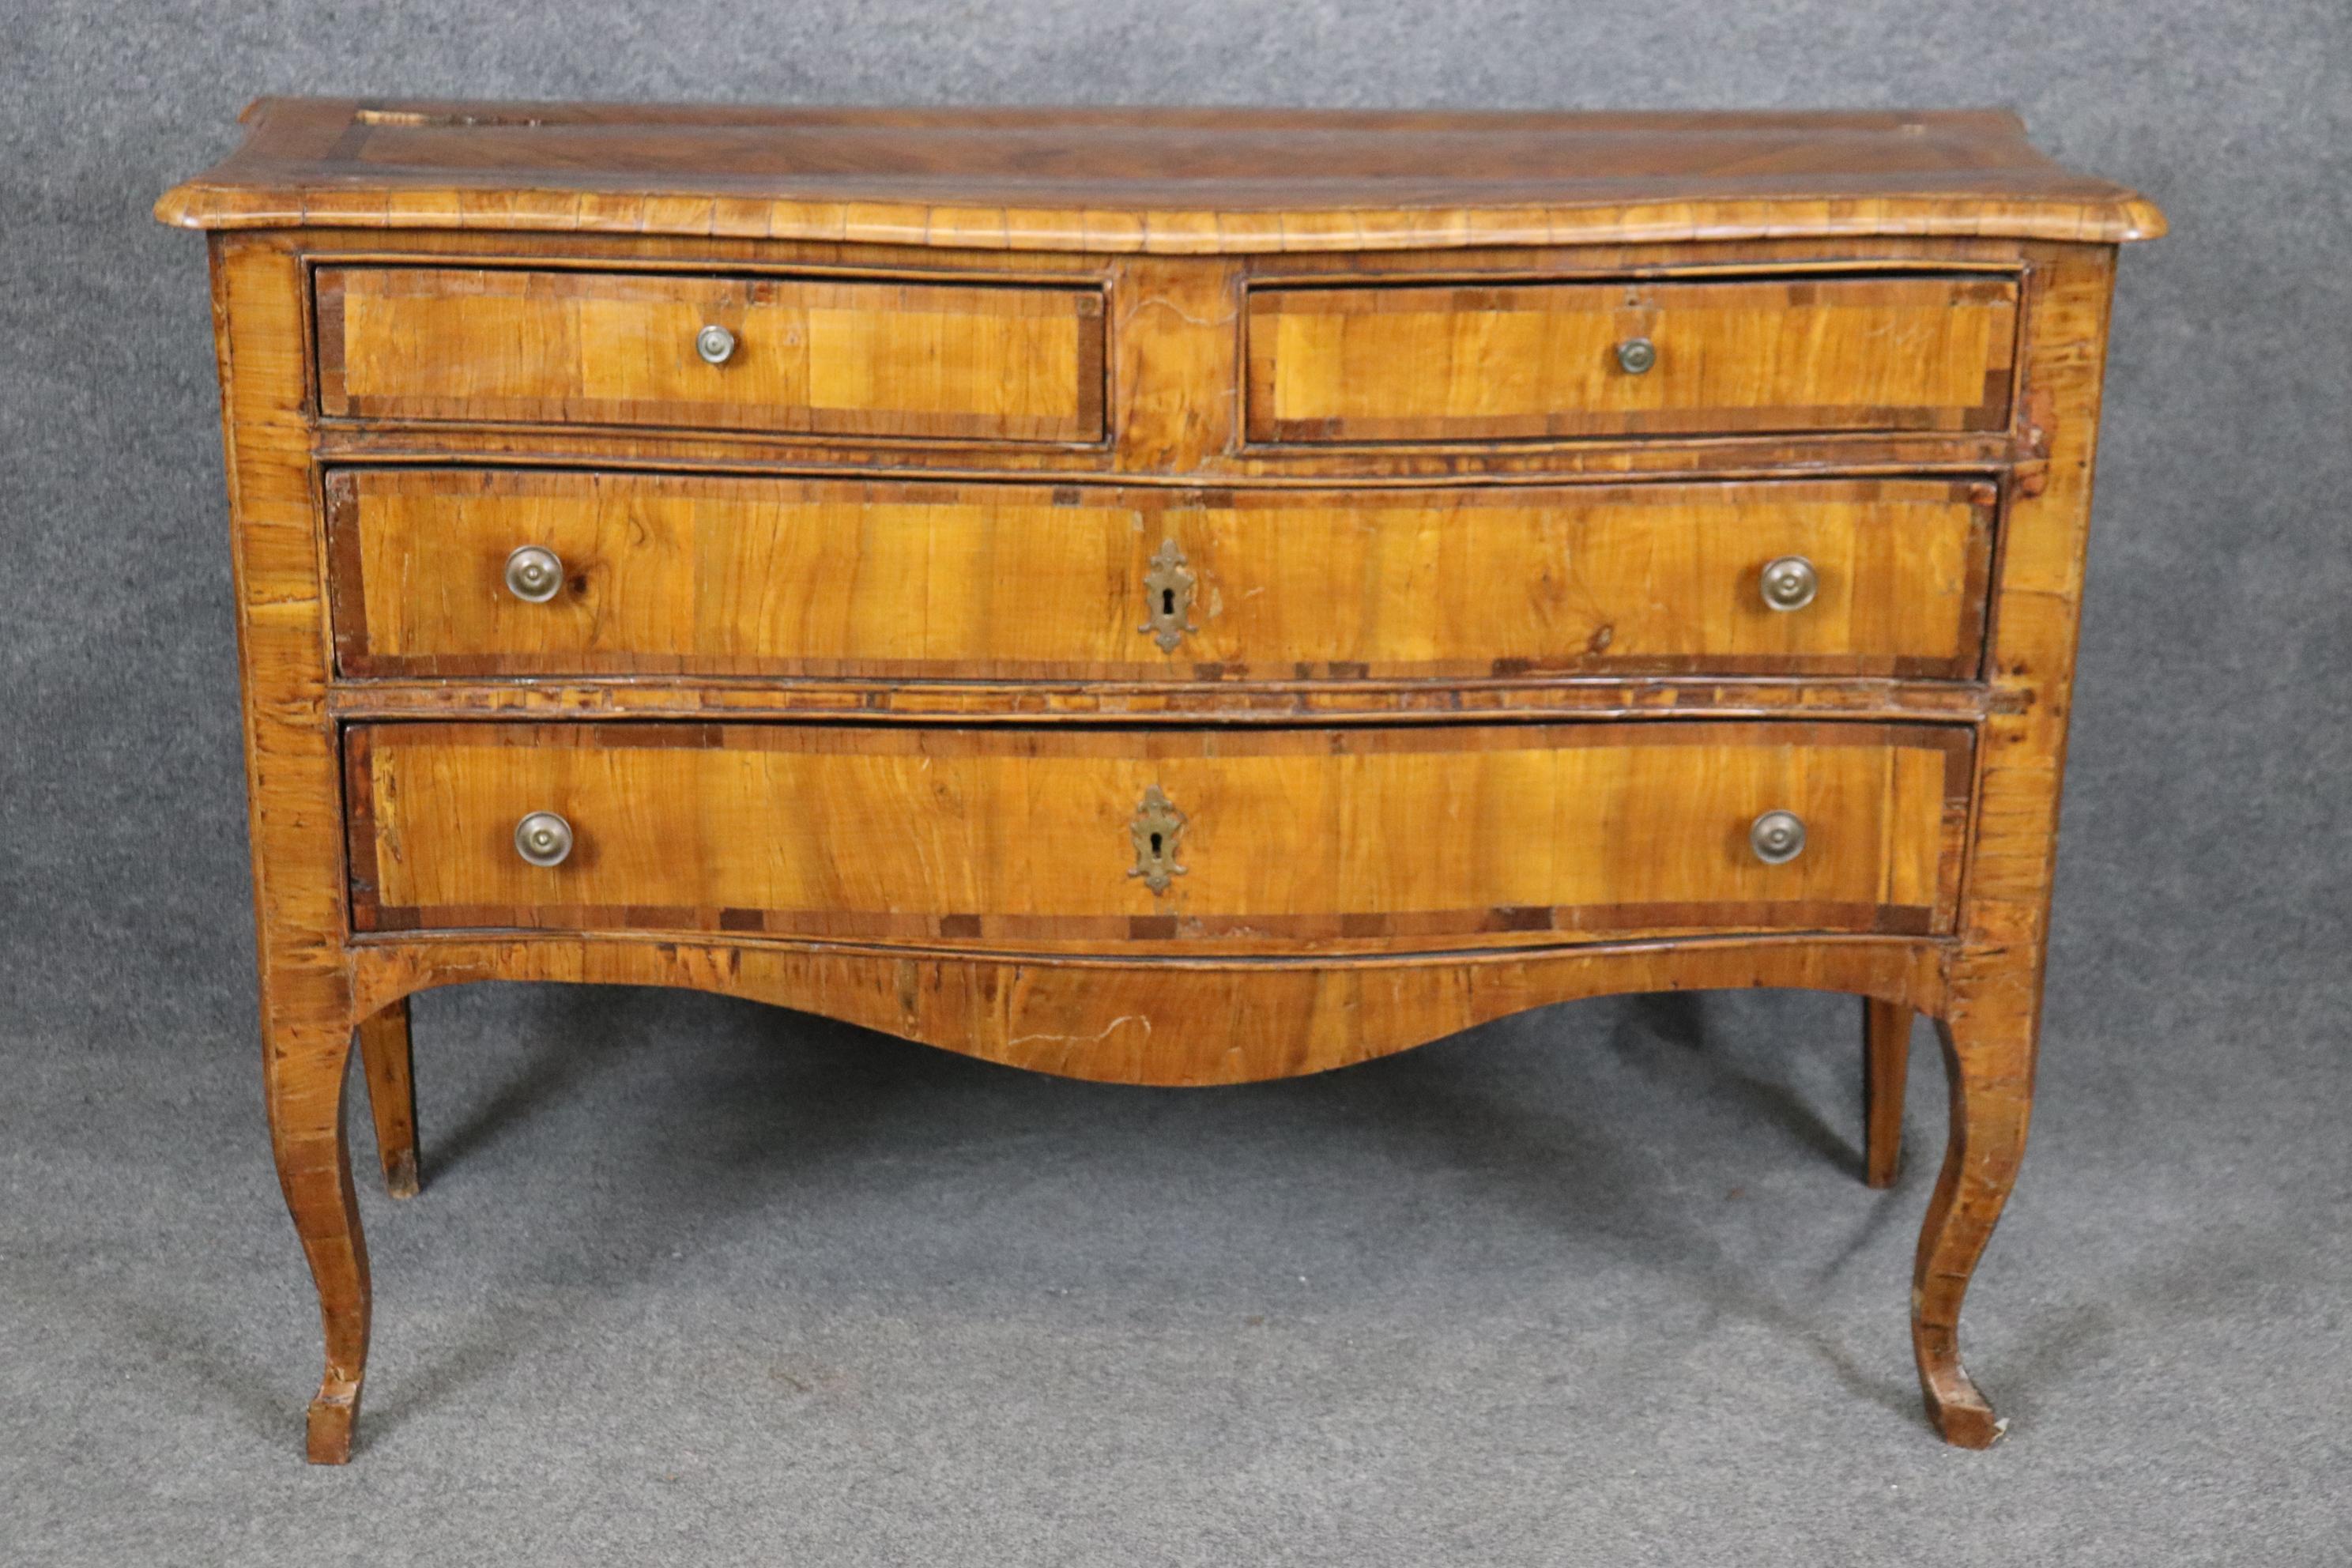 This is a gorgeous antique middle 1740s -1780s era Italian Made commode. The commode is made of Olive wood and designed in the Louis XV style. The piece has its original patina and old repairs, patches, and signs of wear and use that are to be